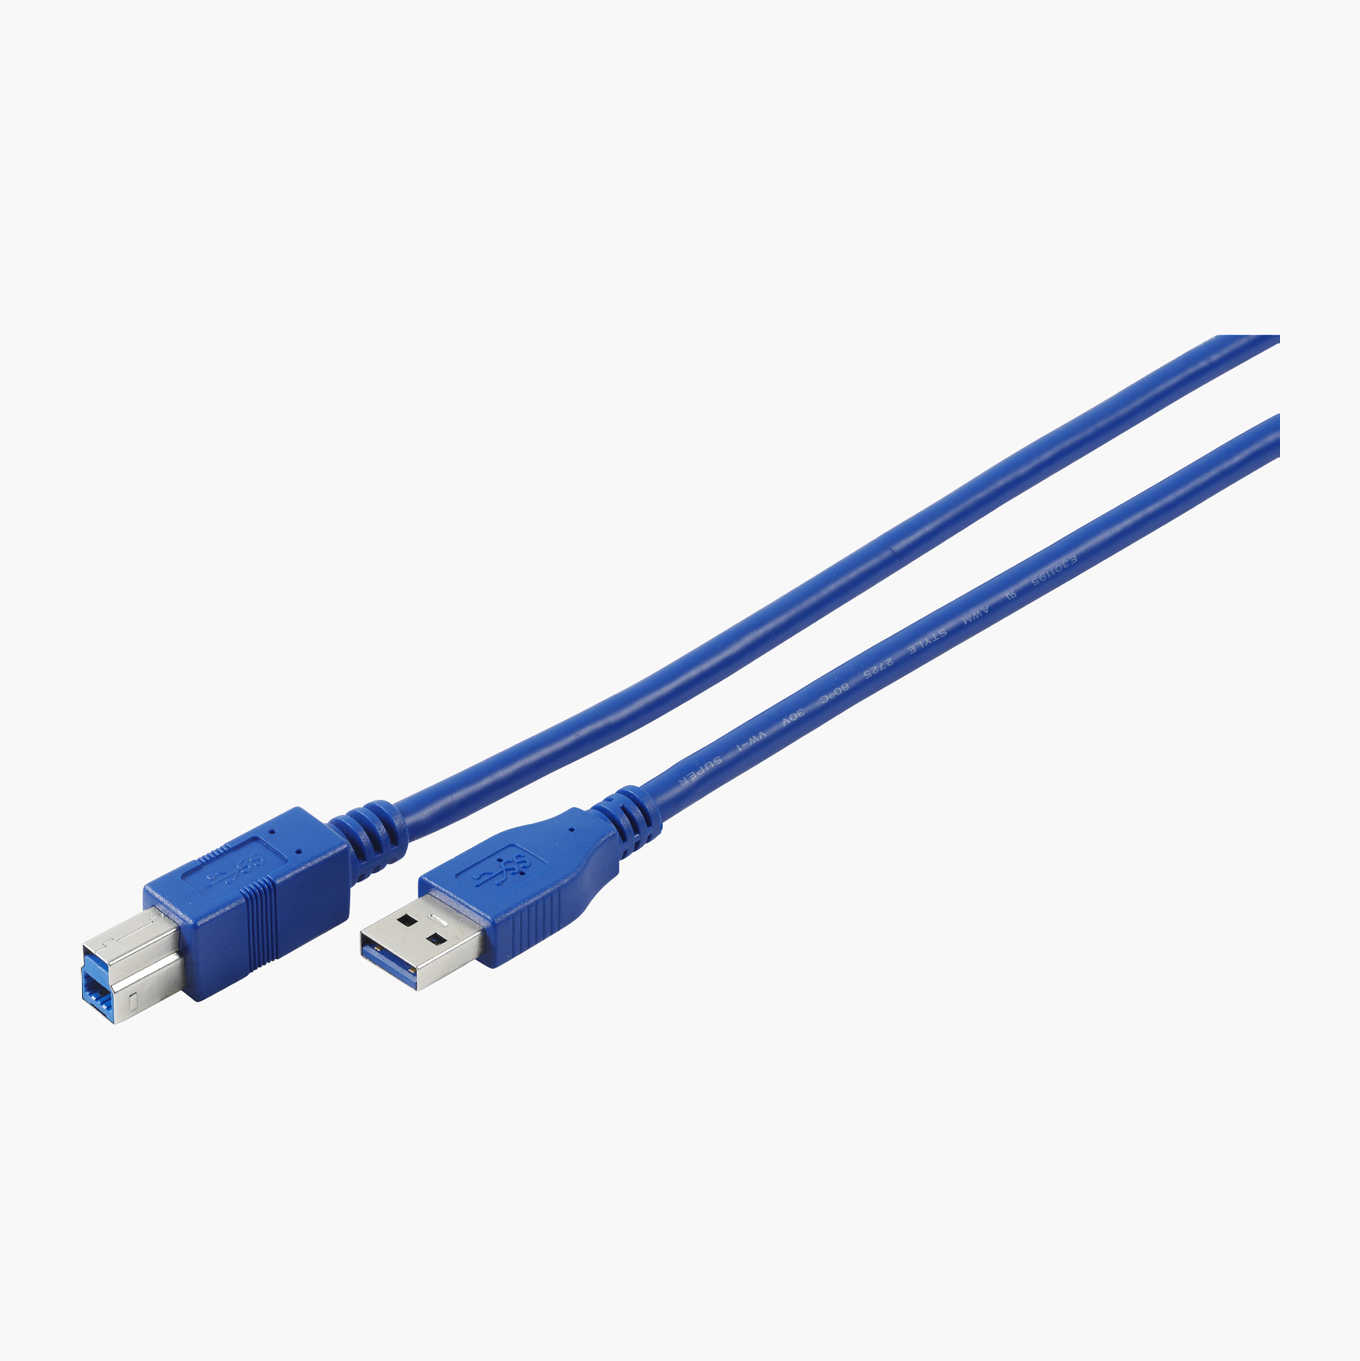 Cable Matters Usb 3.0 A A B 2 Packnegro6 Pies 